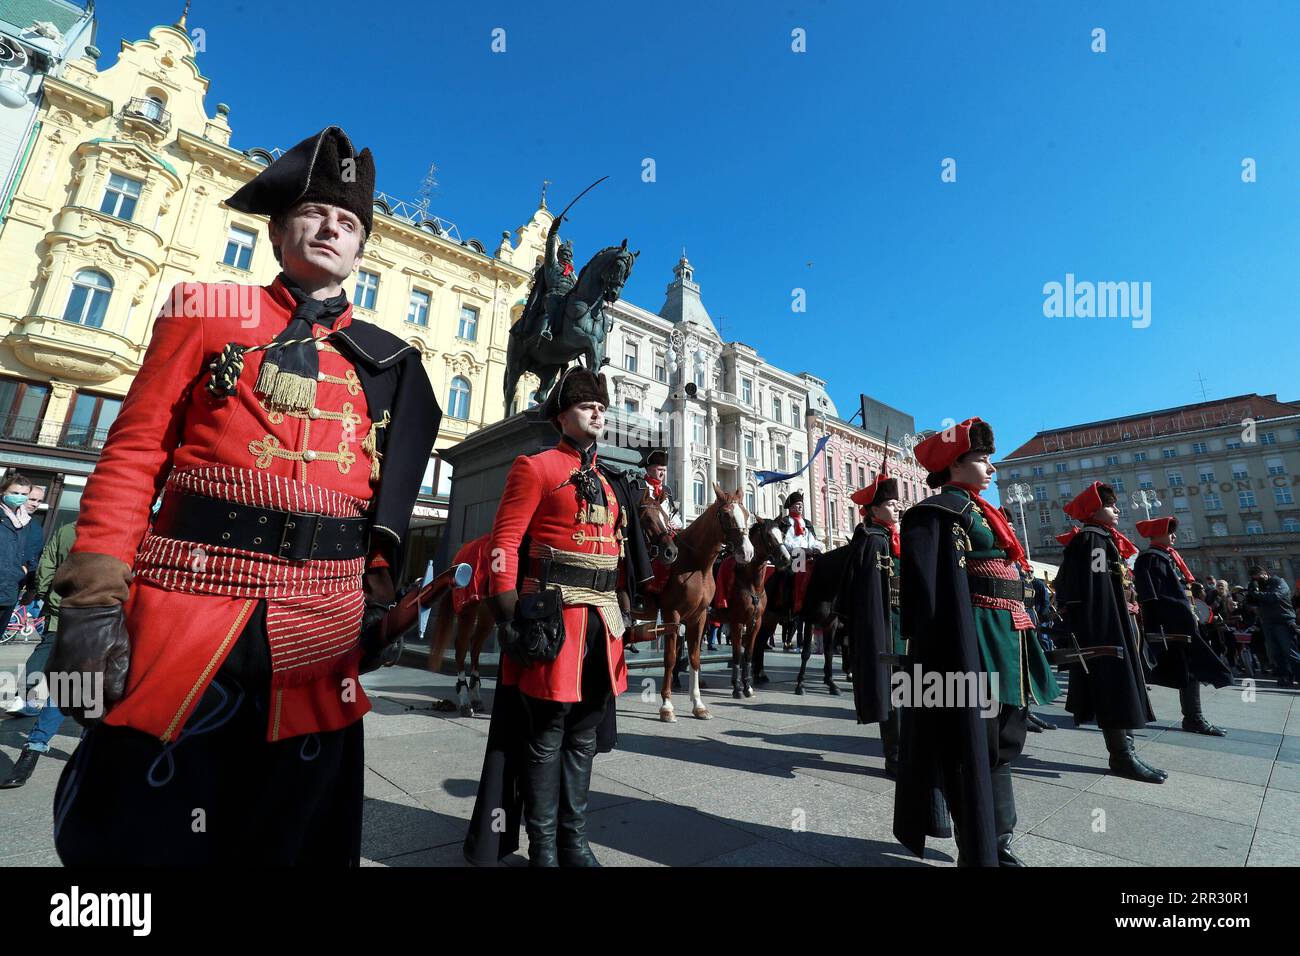 201019 -- ZAGREB, Oct. 19, 2020 -- Members of the Cravat Regiment take part in the Cravat Day celebration in Zagreb, Croatia, on Oct. 18, 2020. Croatians celebrate World Cravat Day on Oct. 18 every year. The Cravat, symbol of culture and style, originated from a red neck scarves worn by Croatian soldiers serving in France in the 17th century. /Pixsell via Xinhua CROATIA-ZAGREB-CRAVAT DAY SanjinxStrukic PUBLICATIONxNOTxINxCHN Stock Photo